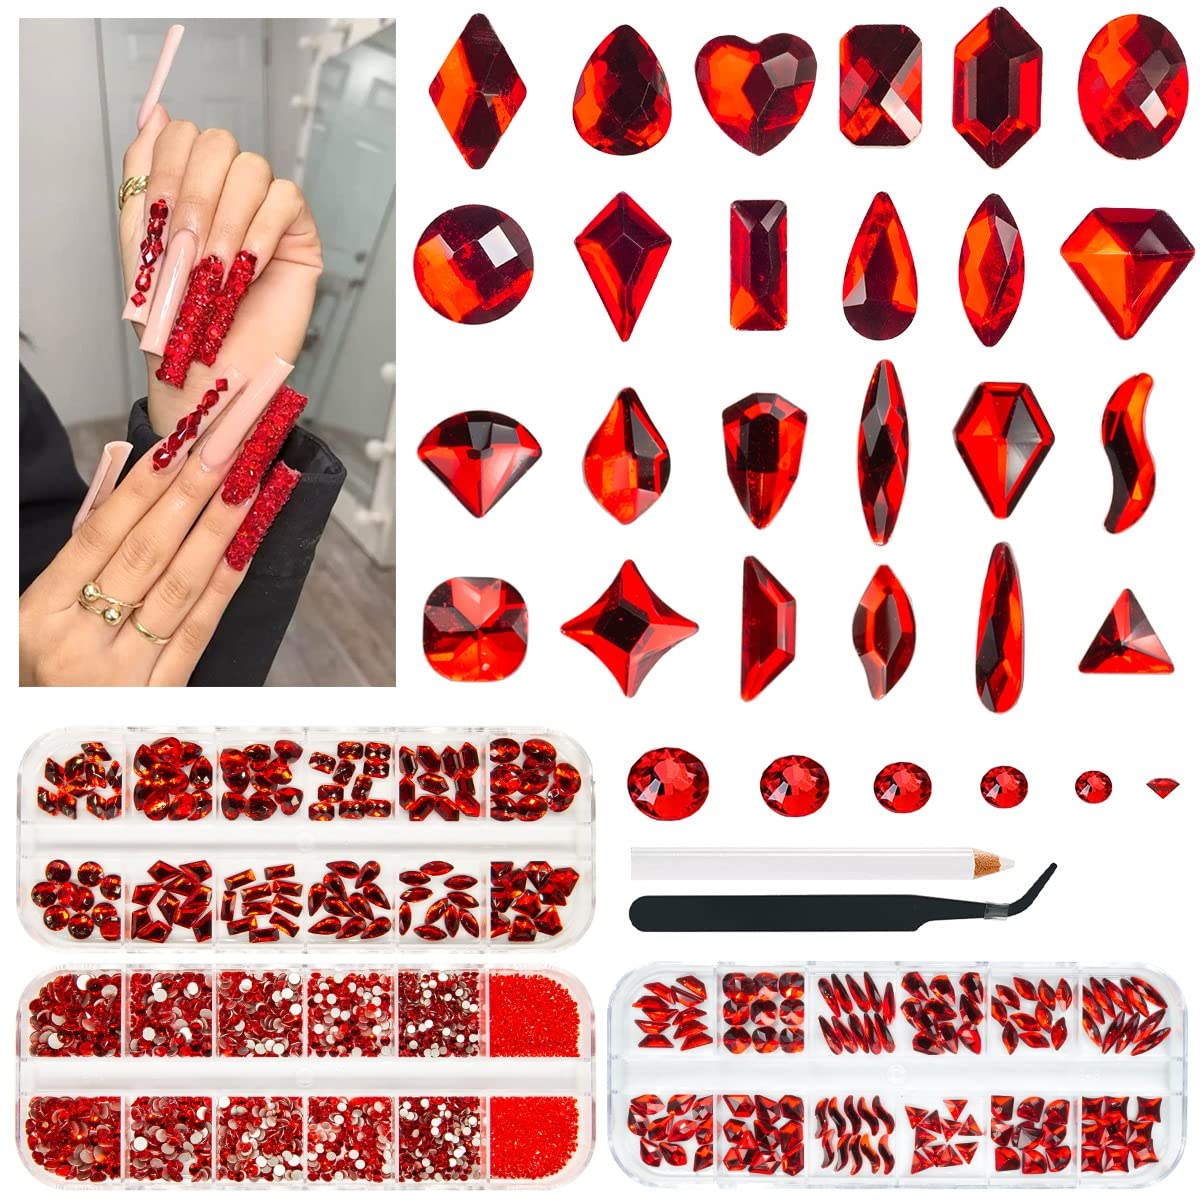 Shiny Red Rhinestones For Nails - Multi Shapes and Sizes